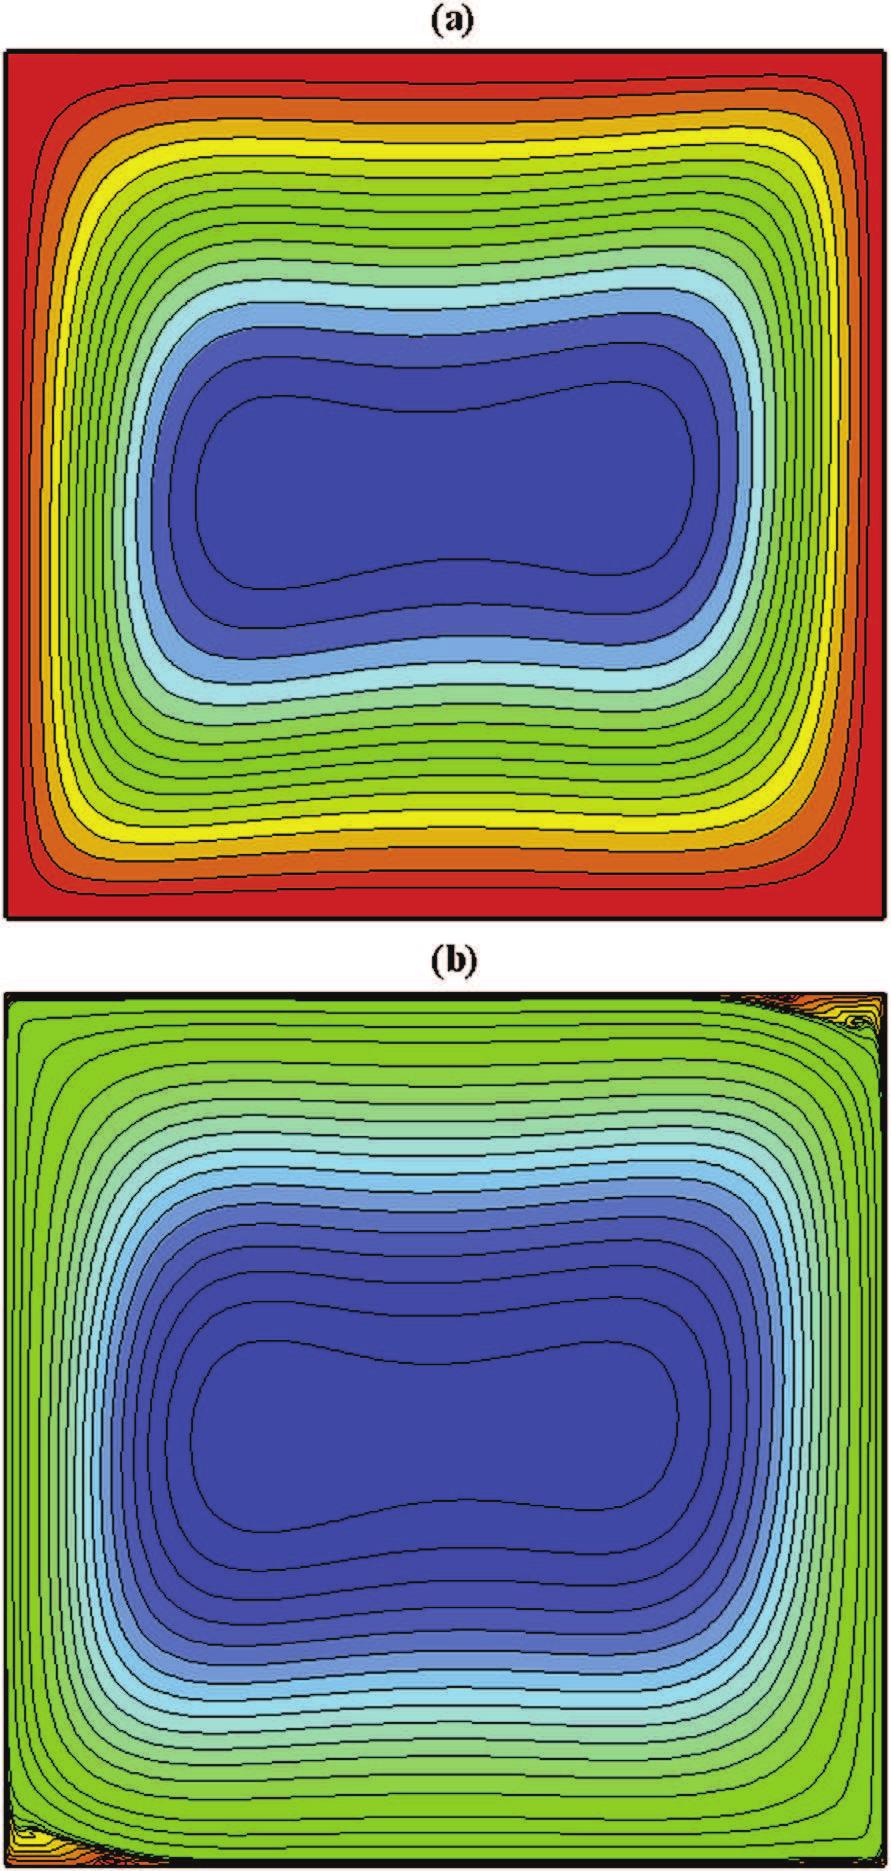 M. Esfandiary et al. / International Journal of Thermal Sciences 105 (2016) 137e158 141 Fig. 4. Streamlines for Ra ¼ 1 10 5,